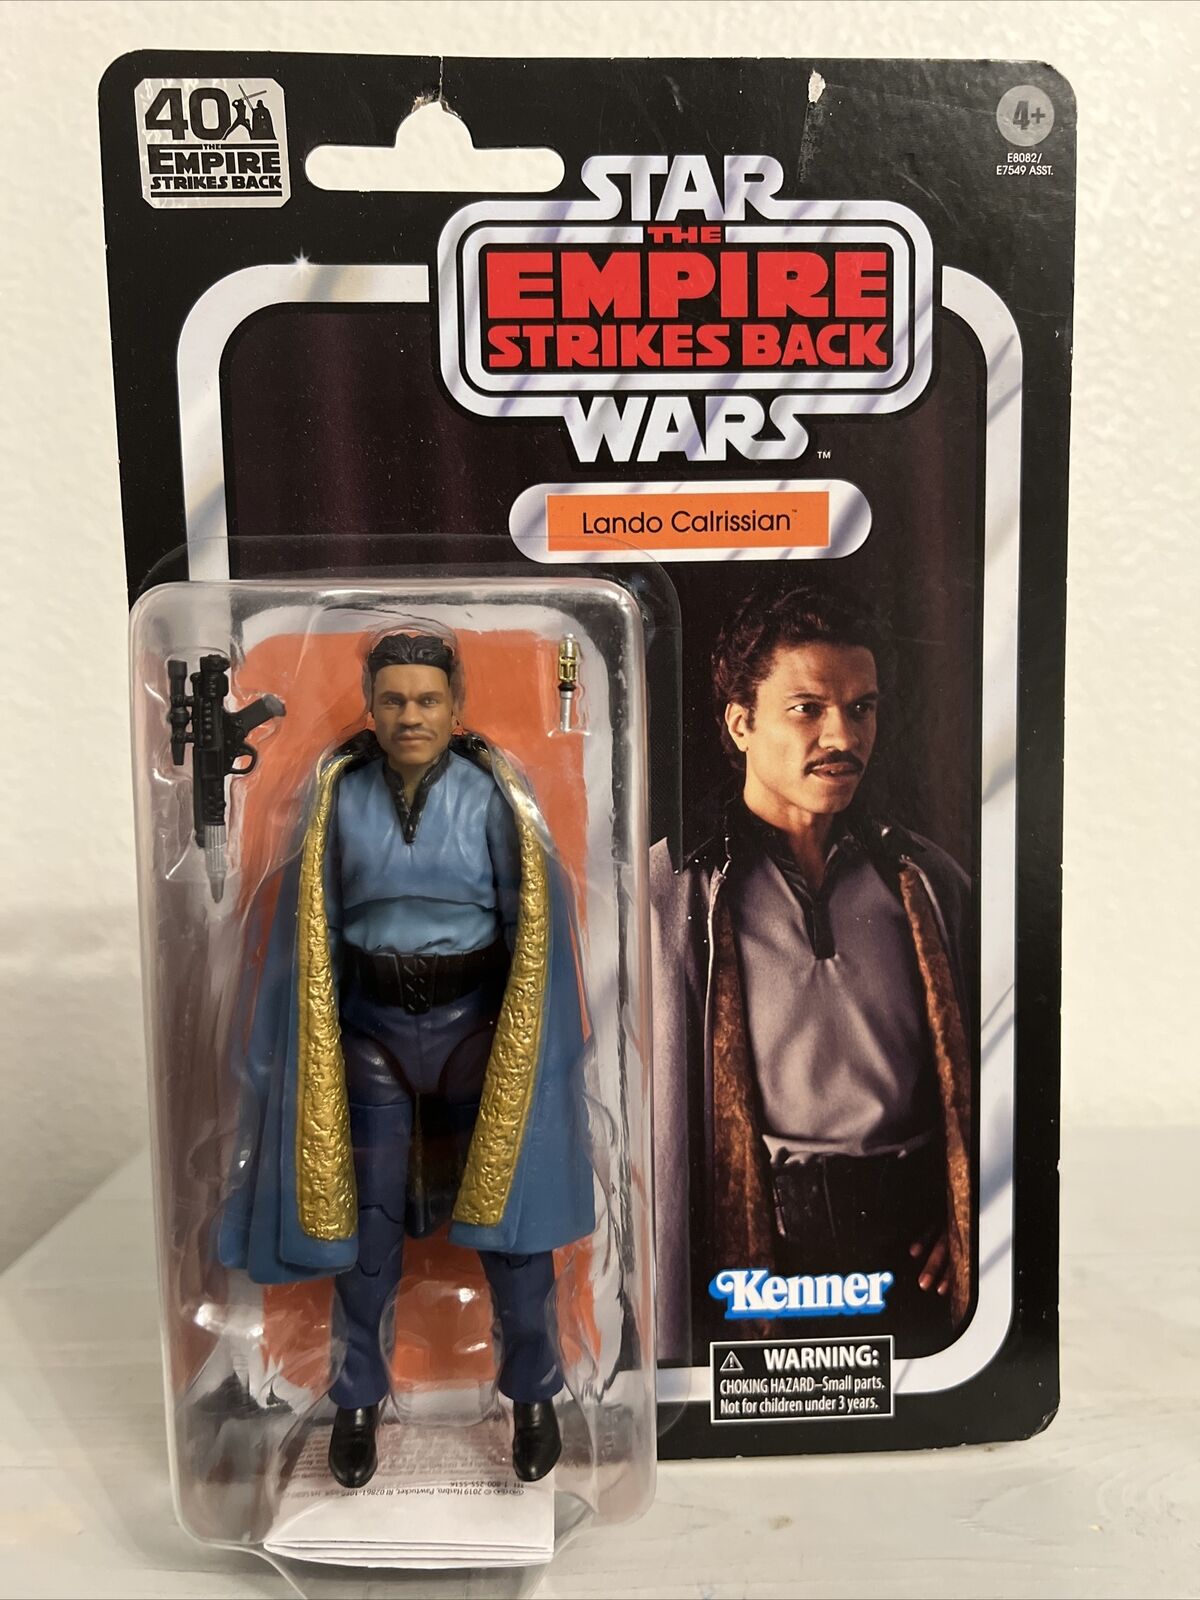 STAR WARS LANDO CALRISSIAN THE EMPIRE STRIKES BACK 8” ACTION FIGURE TOY (NEW)